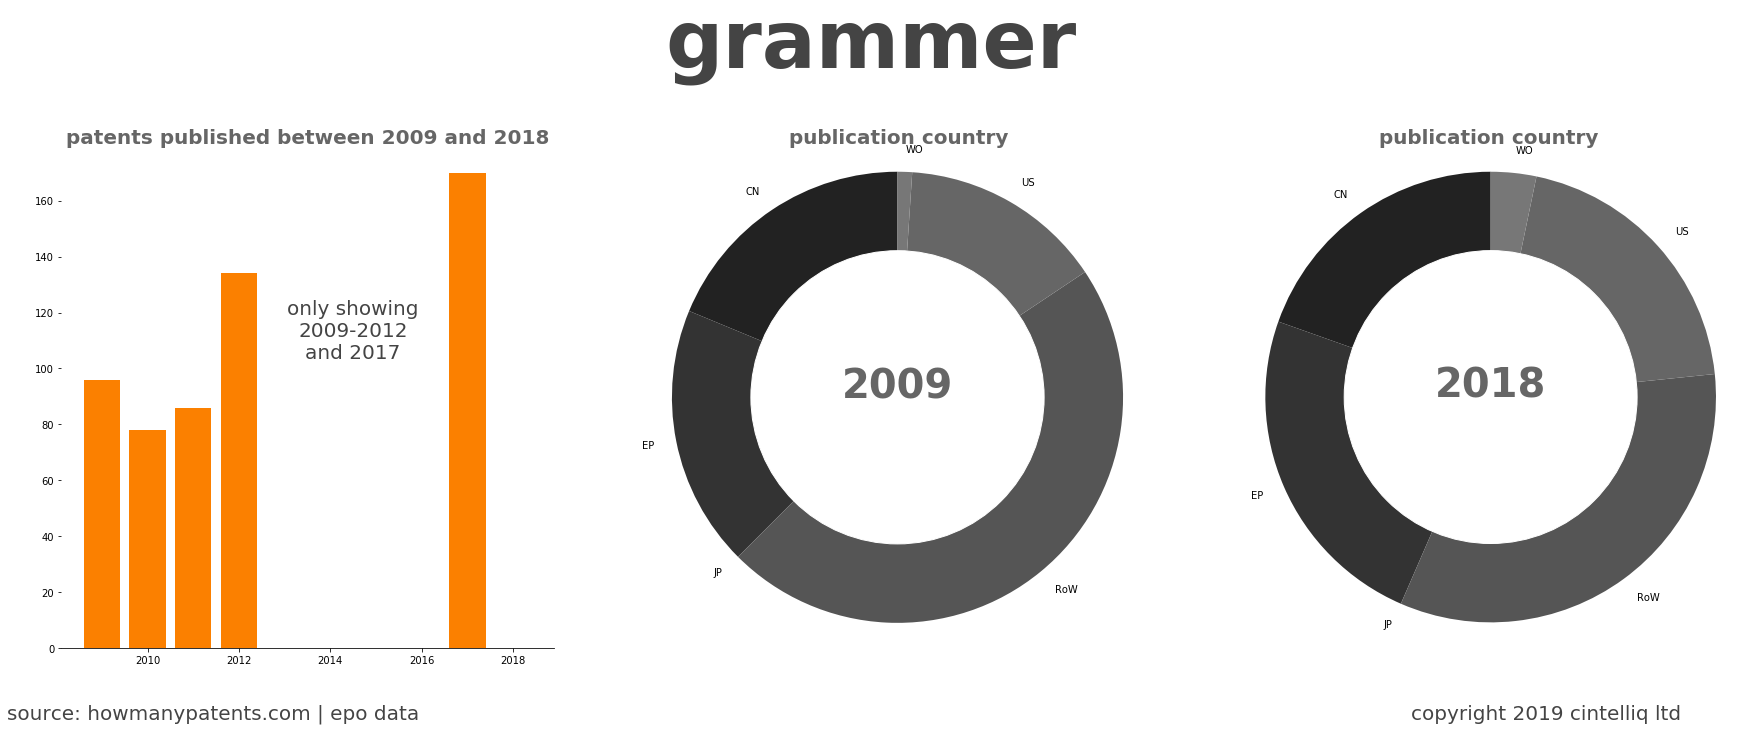 summary of patents for Grammer